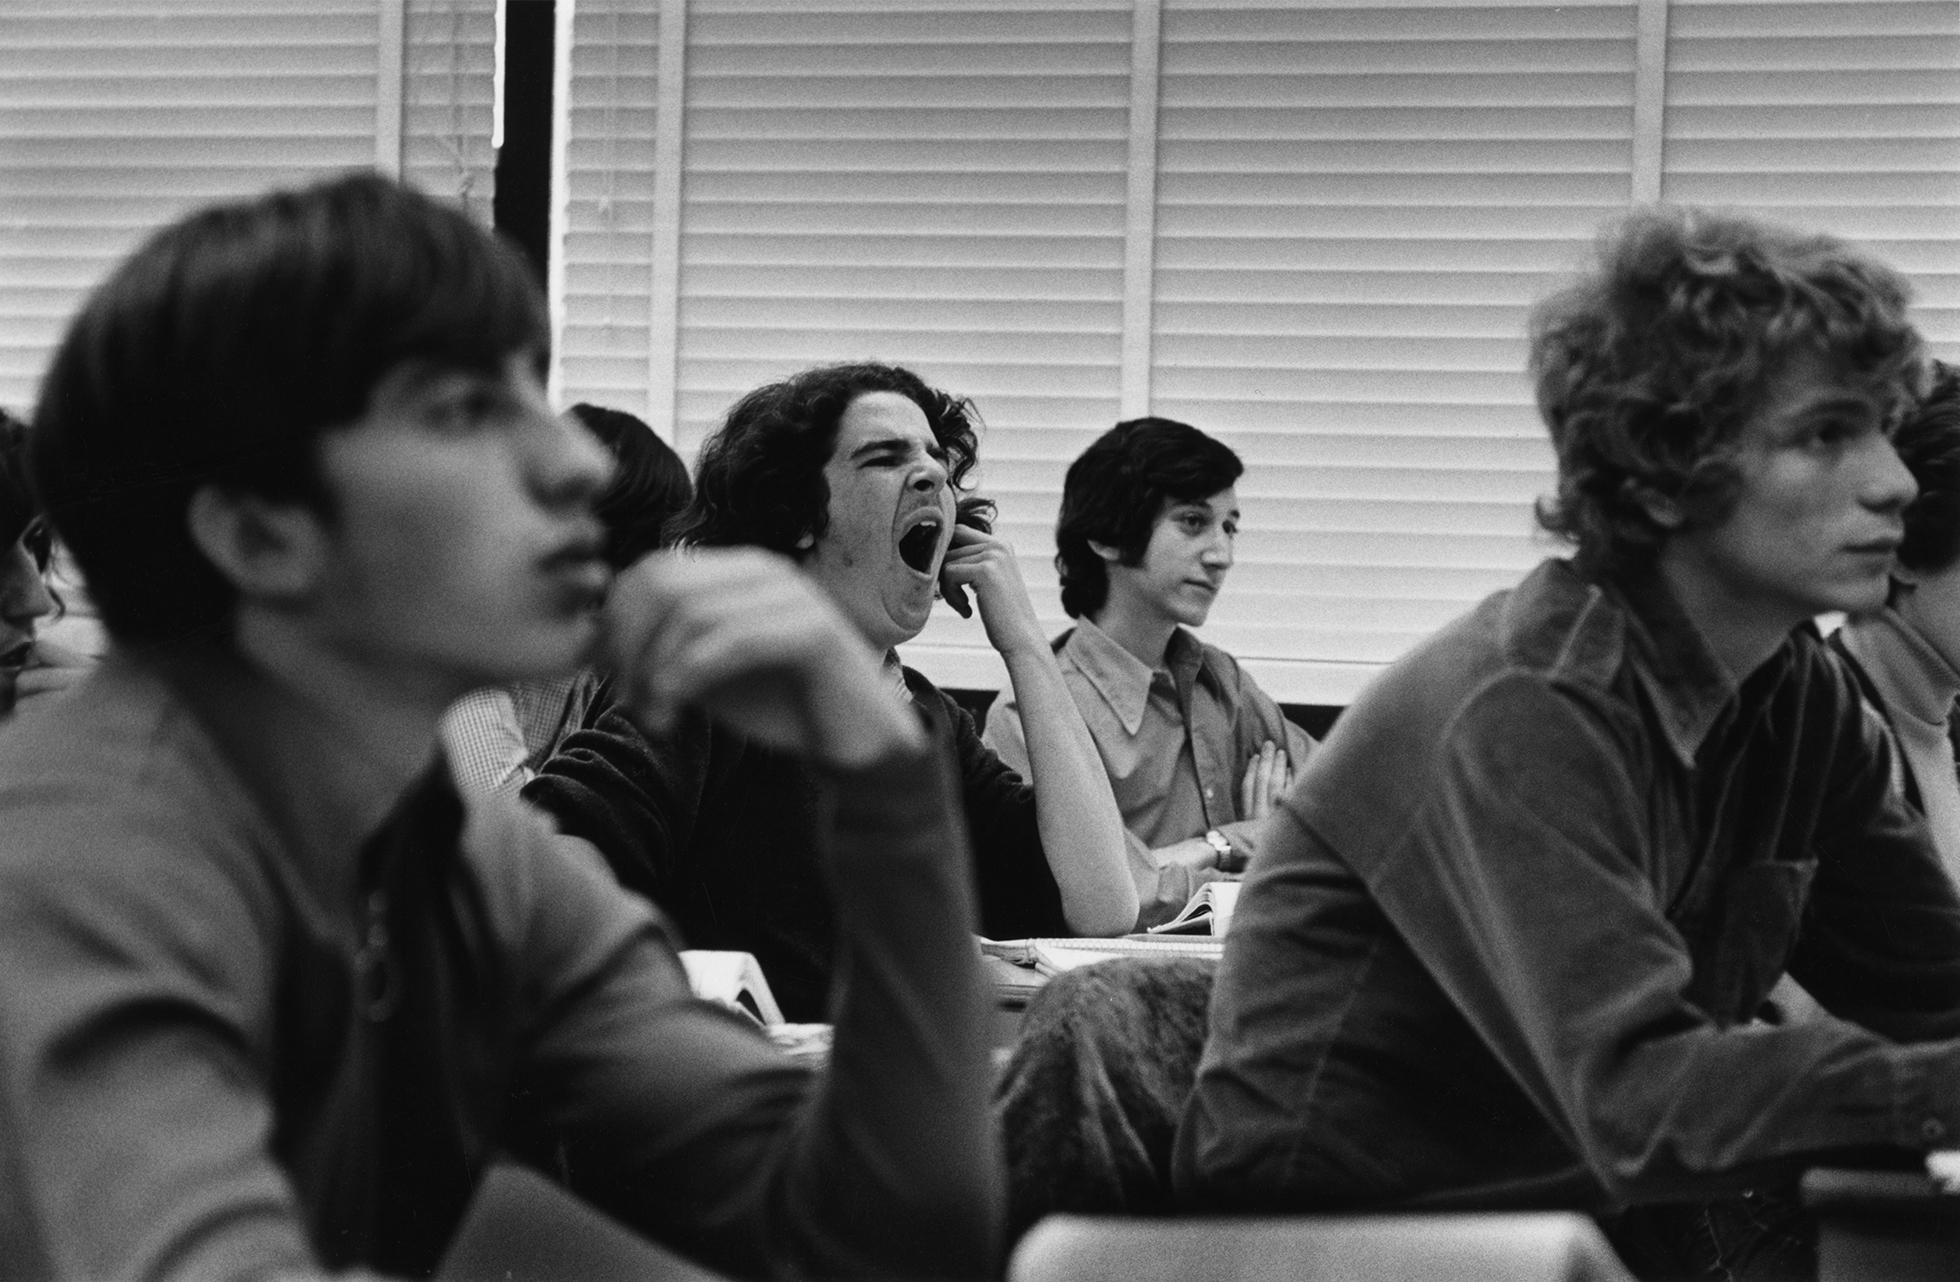 Teenage boys are sitting in a classroom and paying attention to something in front of them off camera, except for one boy who is yawning. From the hairstyles it looks like the early 1970s.